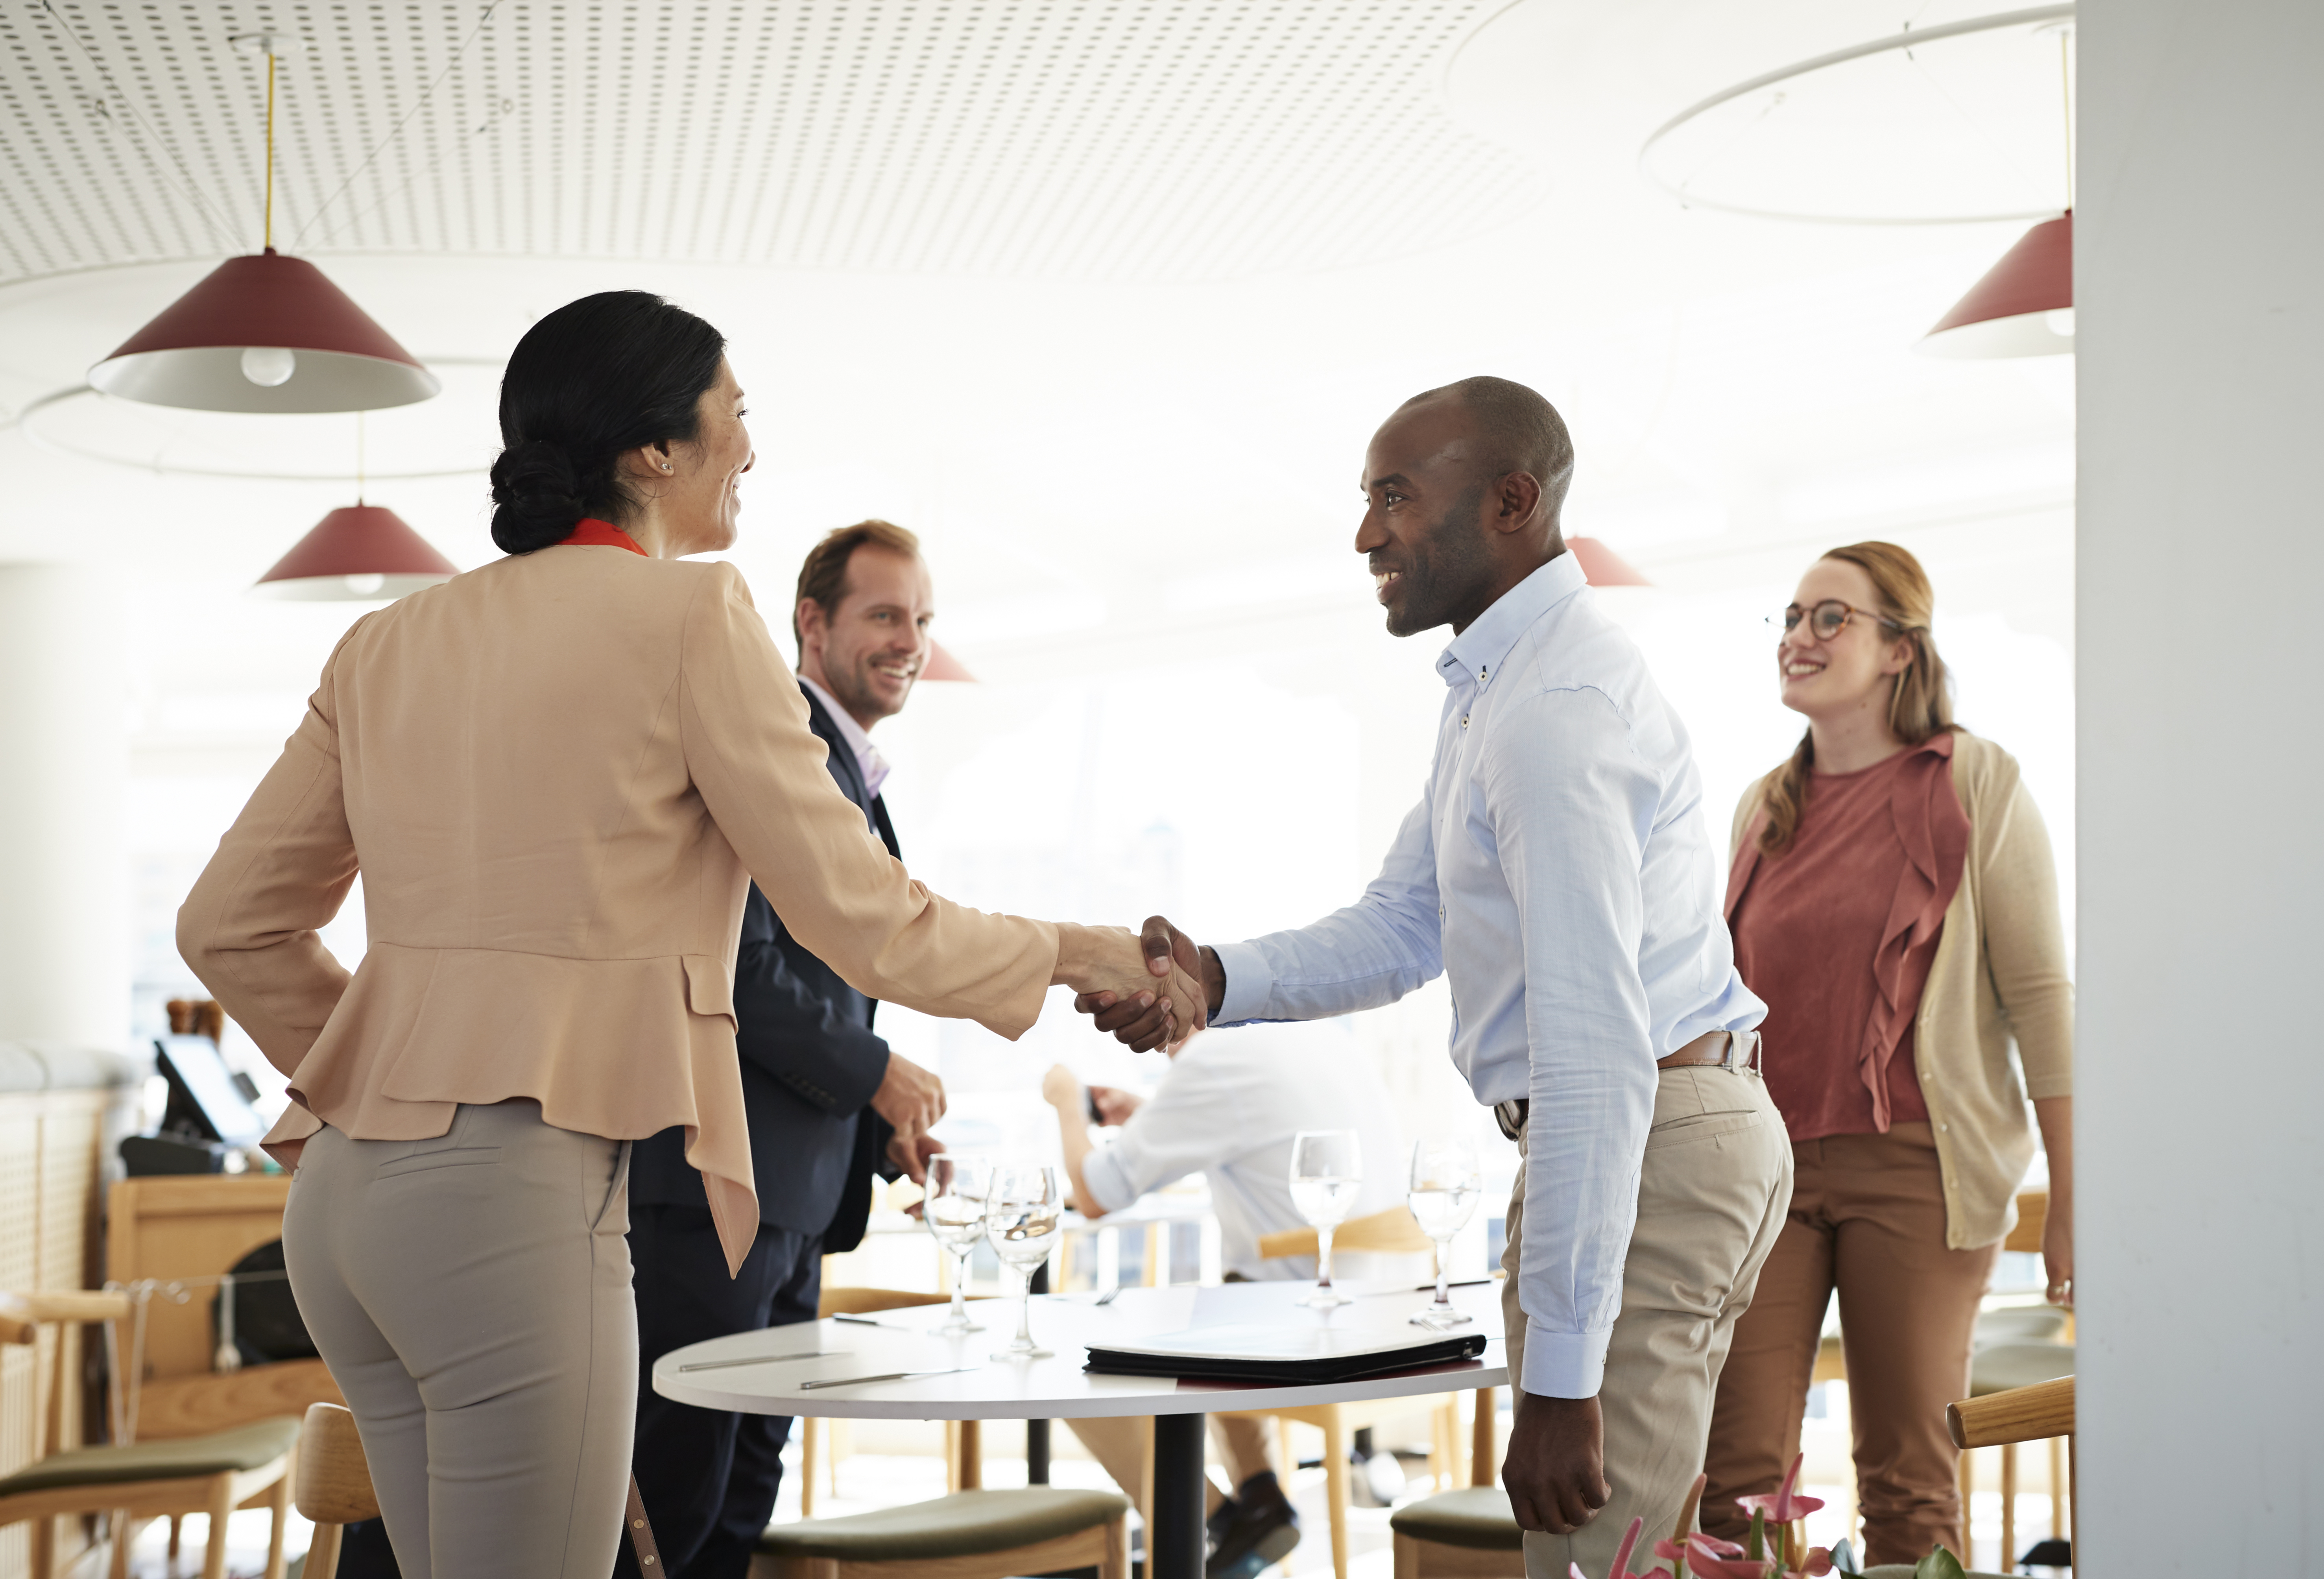 Business people enjoy a casual meeting at a restaurant table, finalizing a deal with a handshake.